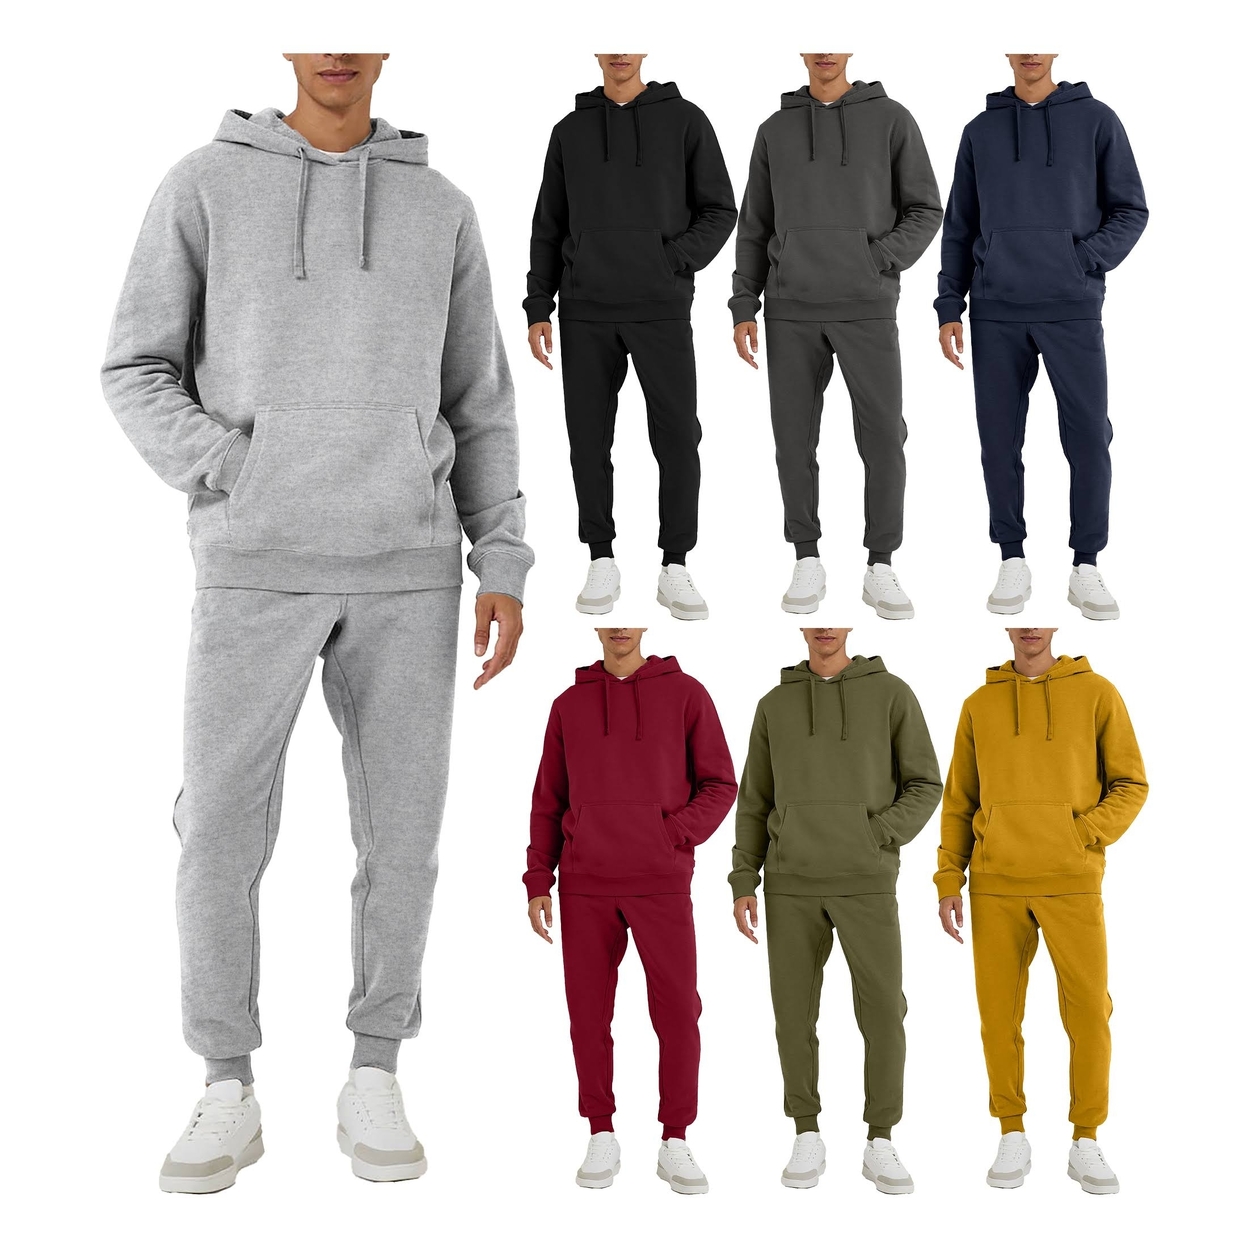 Multi-Pack: Men's Big & Tall Athletic Active Jogging Winter Warm Fleece Lined Pullover Tracksuit Set - Grey, 2-pack, Xx-large